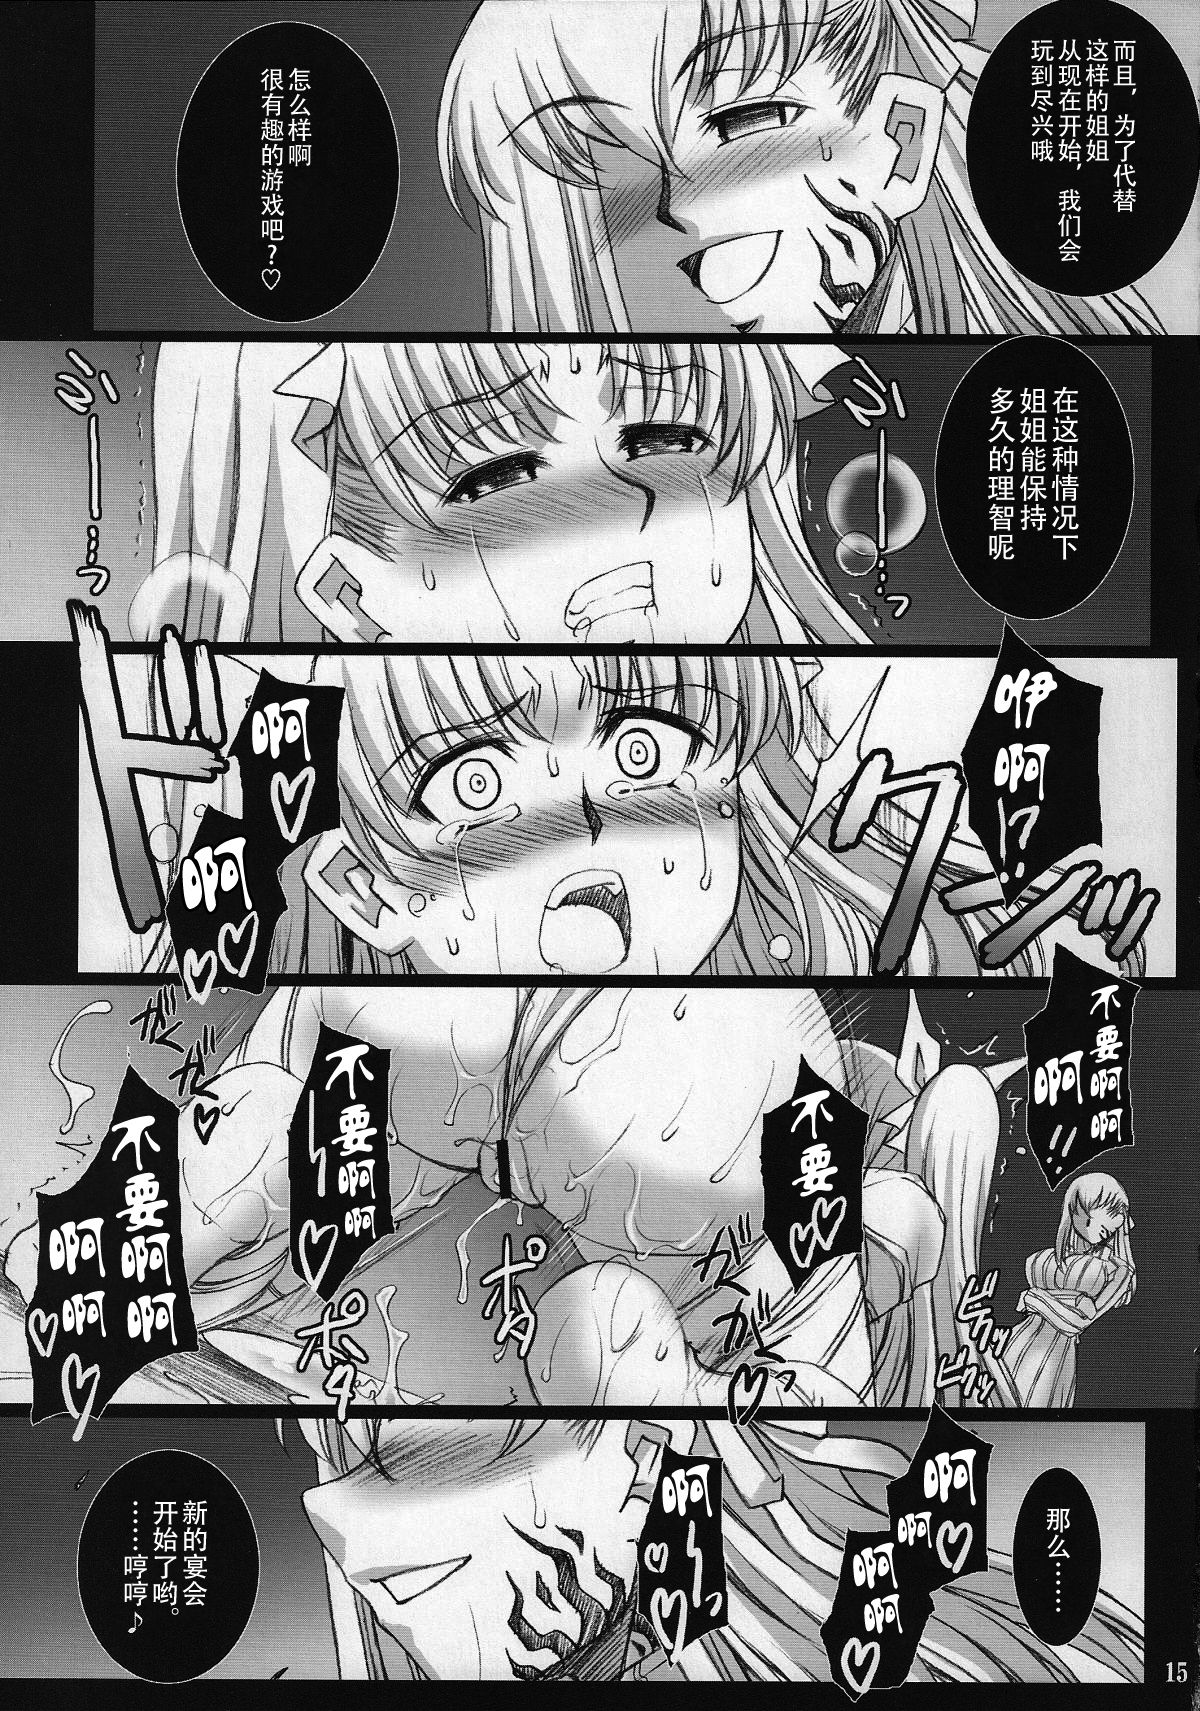 (COMIC1☆2) [H.B (B-RIVER)] Red Degeneration -DAY/3- (Fate/stay night) [Chinese] [不咕鸟汉化组] page 14 full